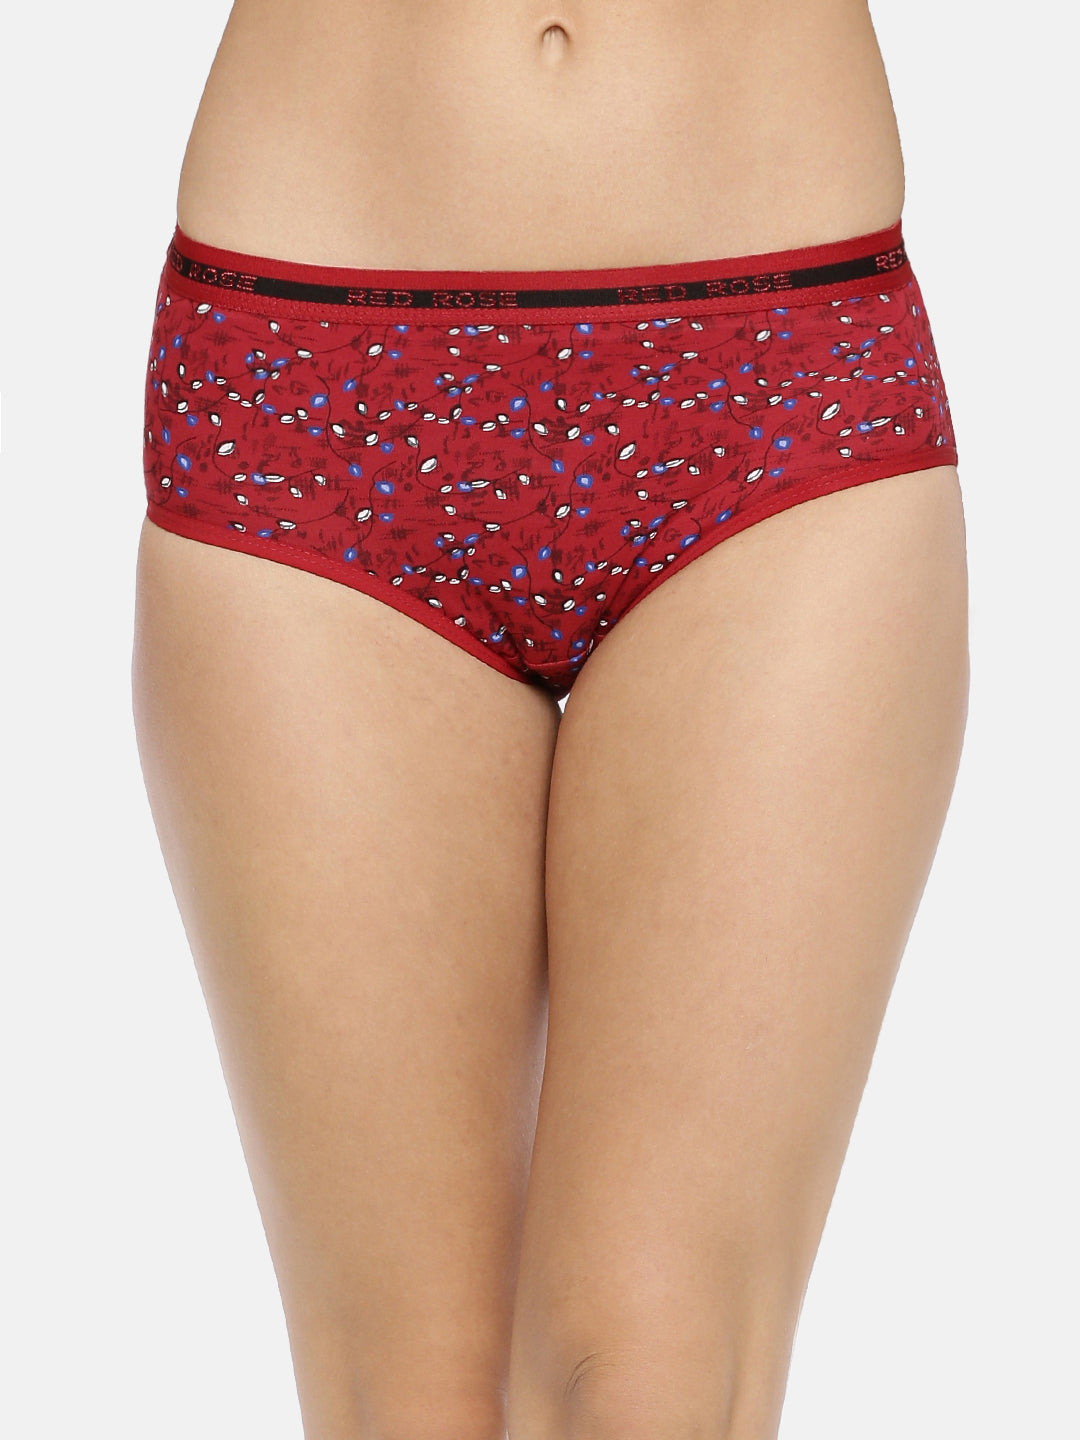 Red Rose Cotton Medium Rise Full Coverage Hipster Panties Multicolor Pack of 3